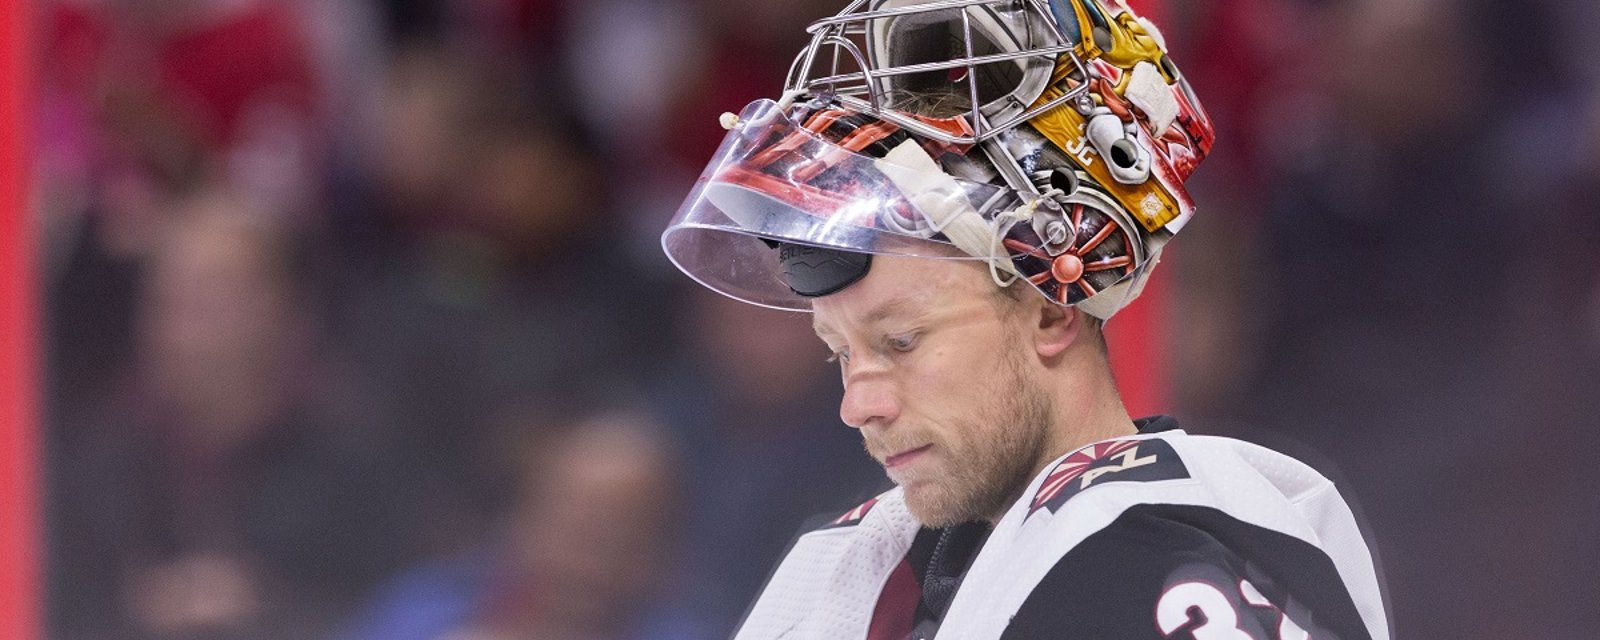 Coyotes mysteriously pull Antti Raanta out of the starting lineup just minutes before the game.